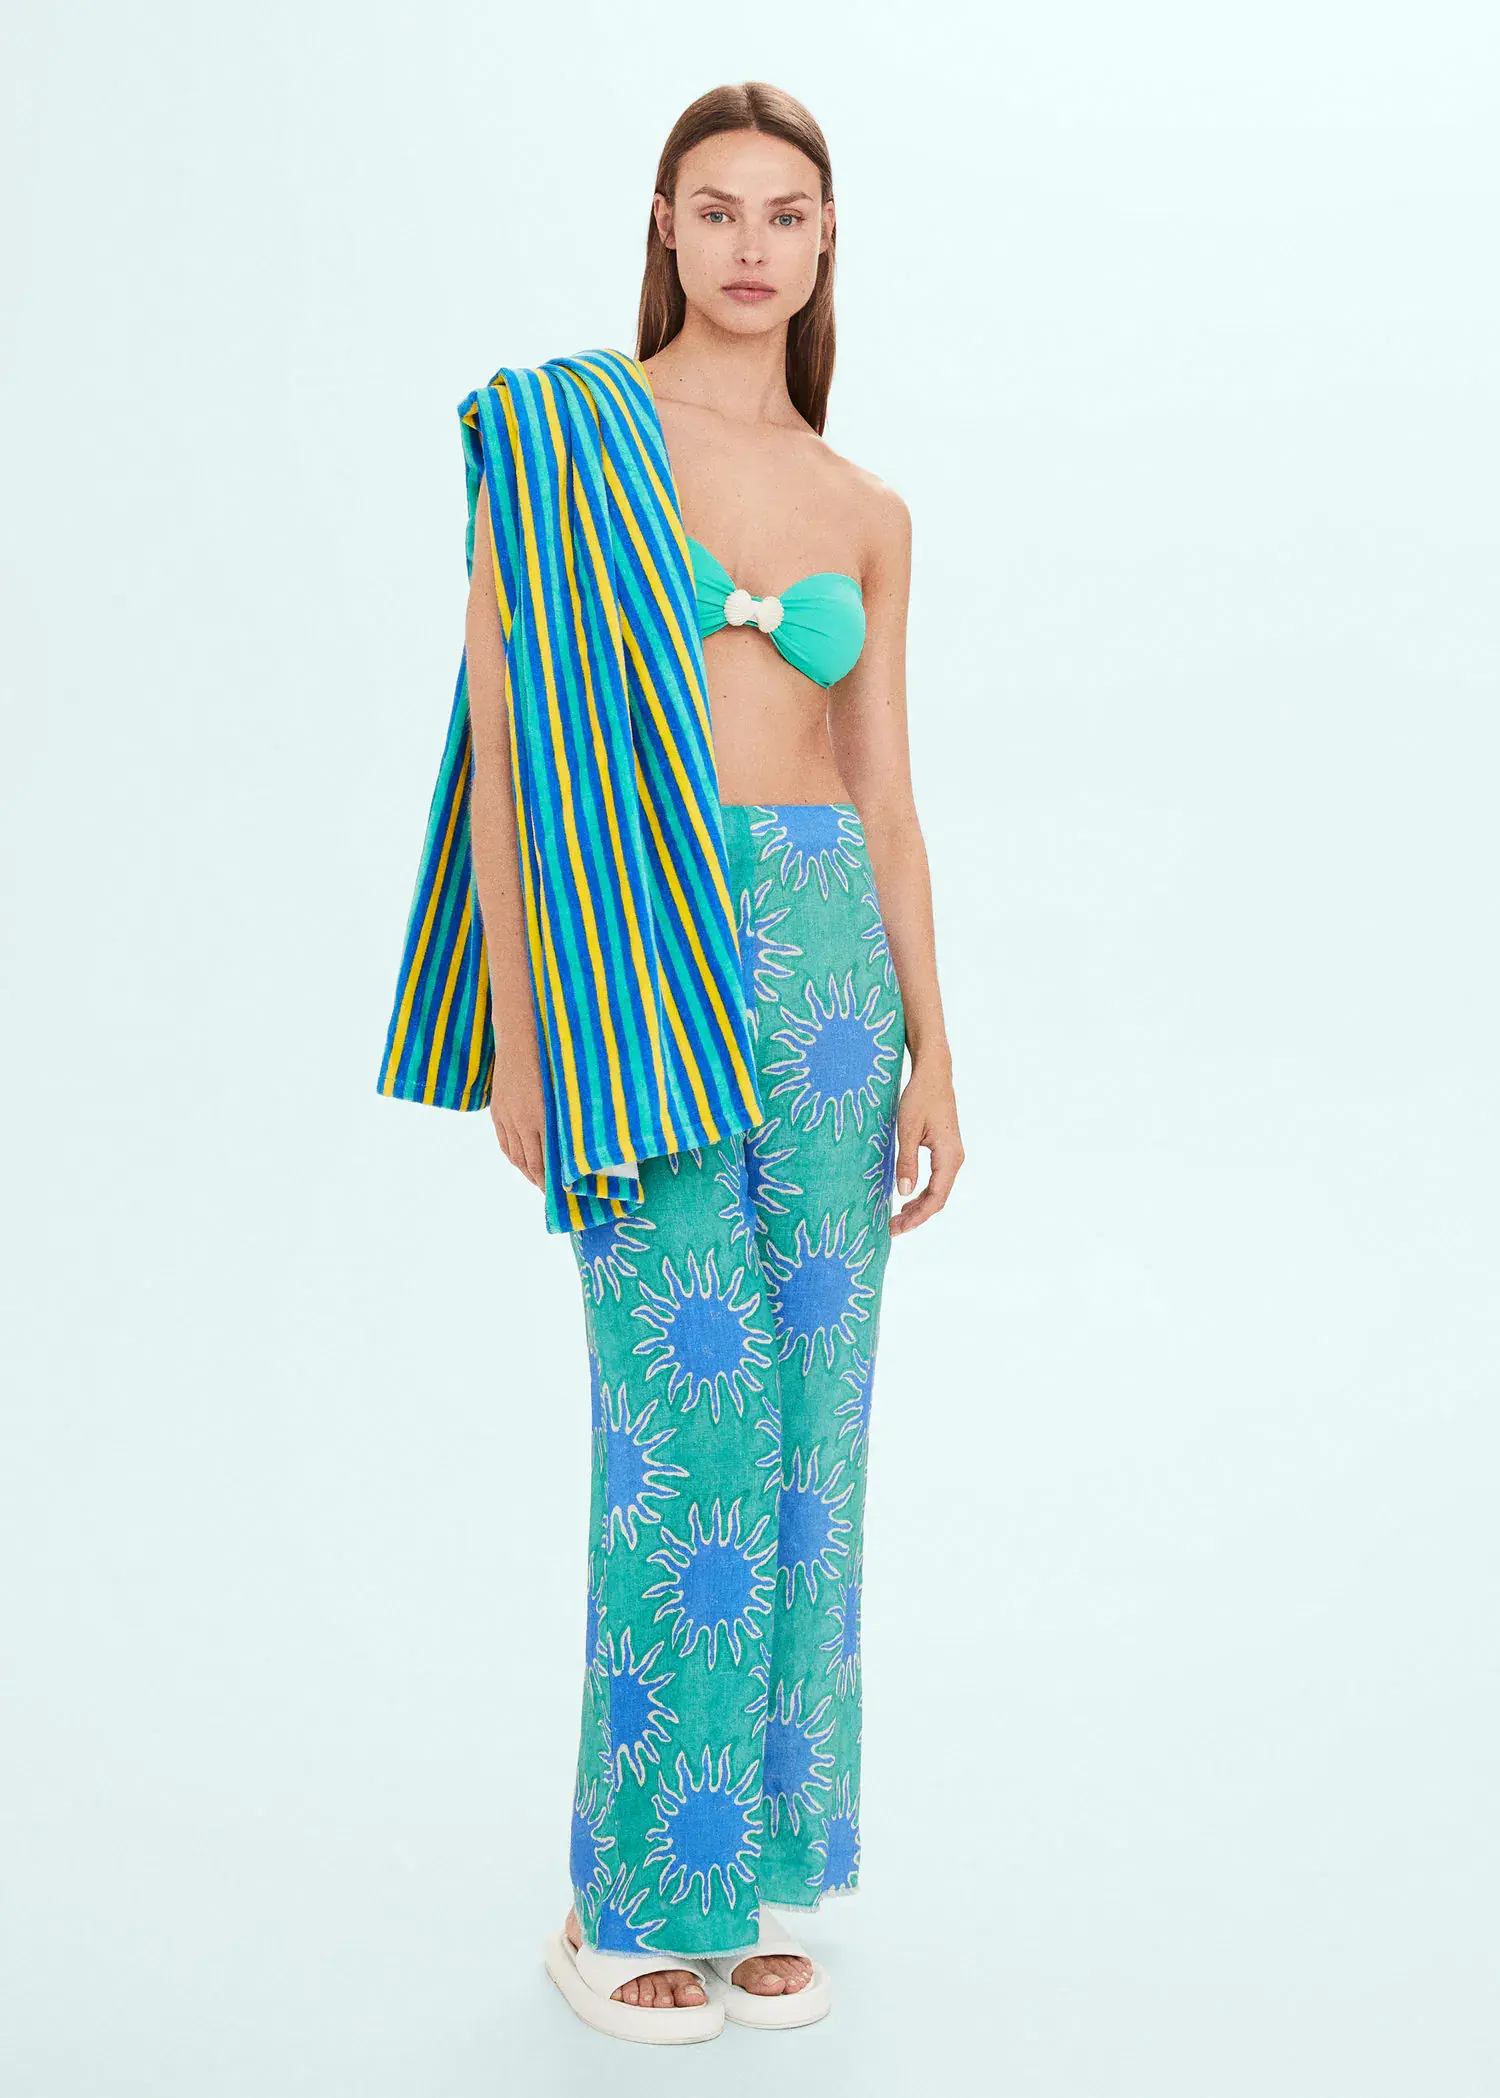 Mango Multi-coloured striped beach towel. a woman standing in a blue and green outfit. 